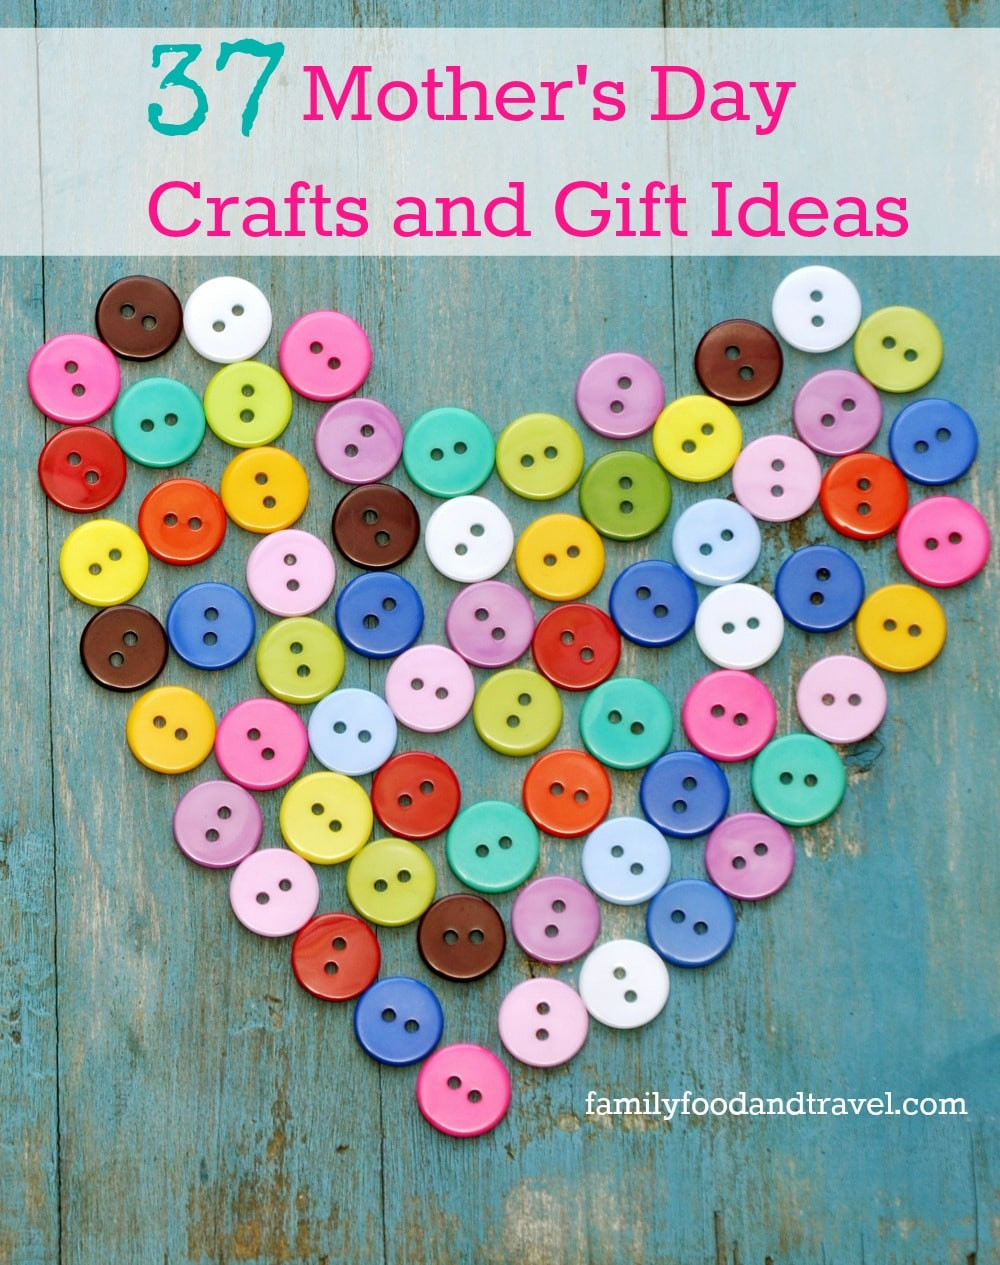 Mother'S Day Craft Gift Ideas
 37 Mothers Day Crafts and Gift Ideas